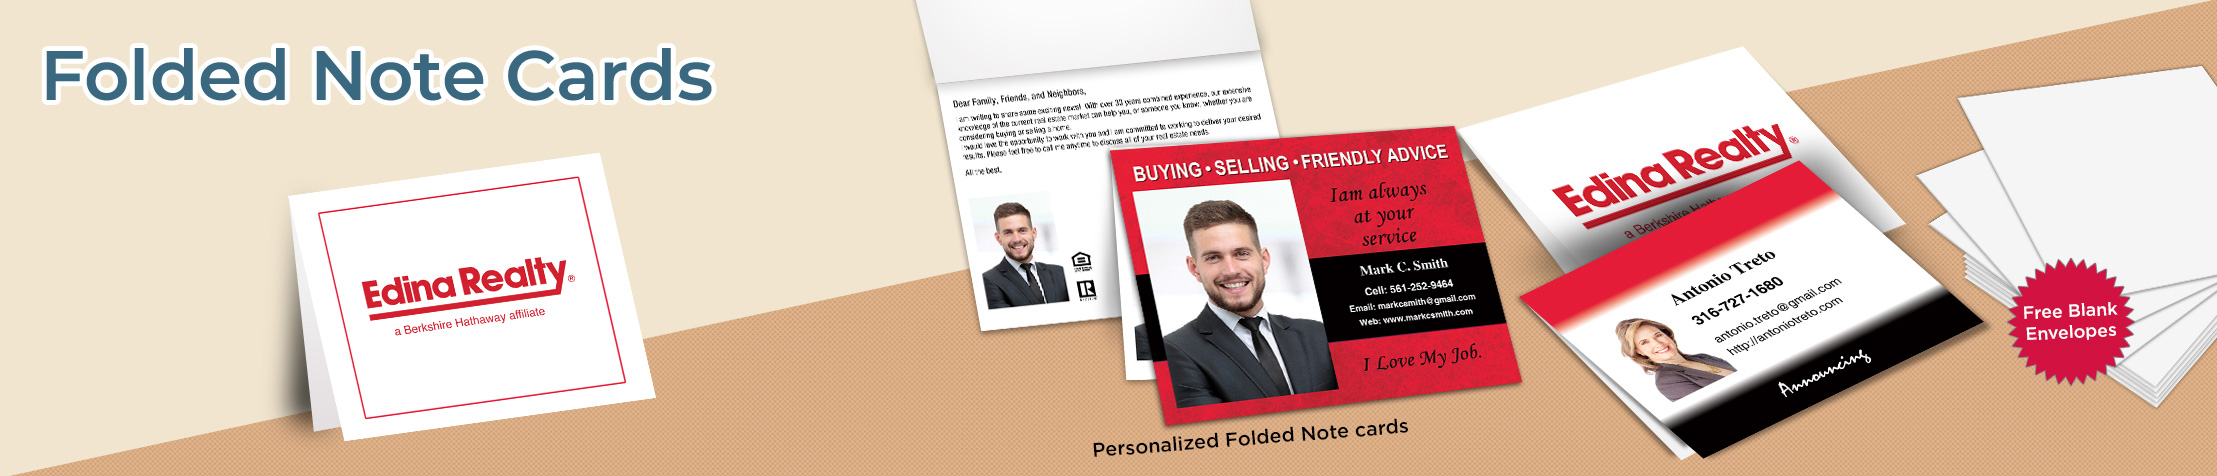 Edina Realty Real Estate Postcards -  postcard templates and direct mail postcard mailing services | BestPrintBuy.com